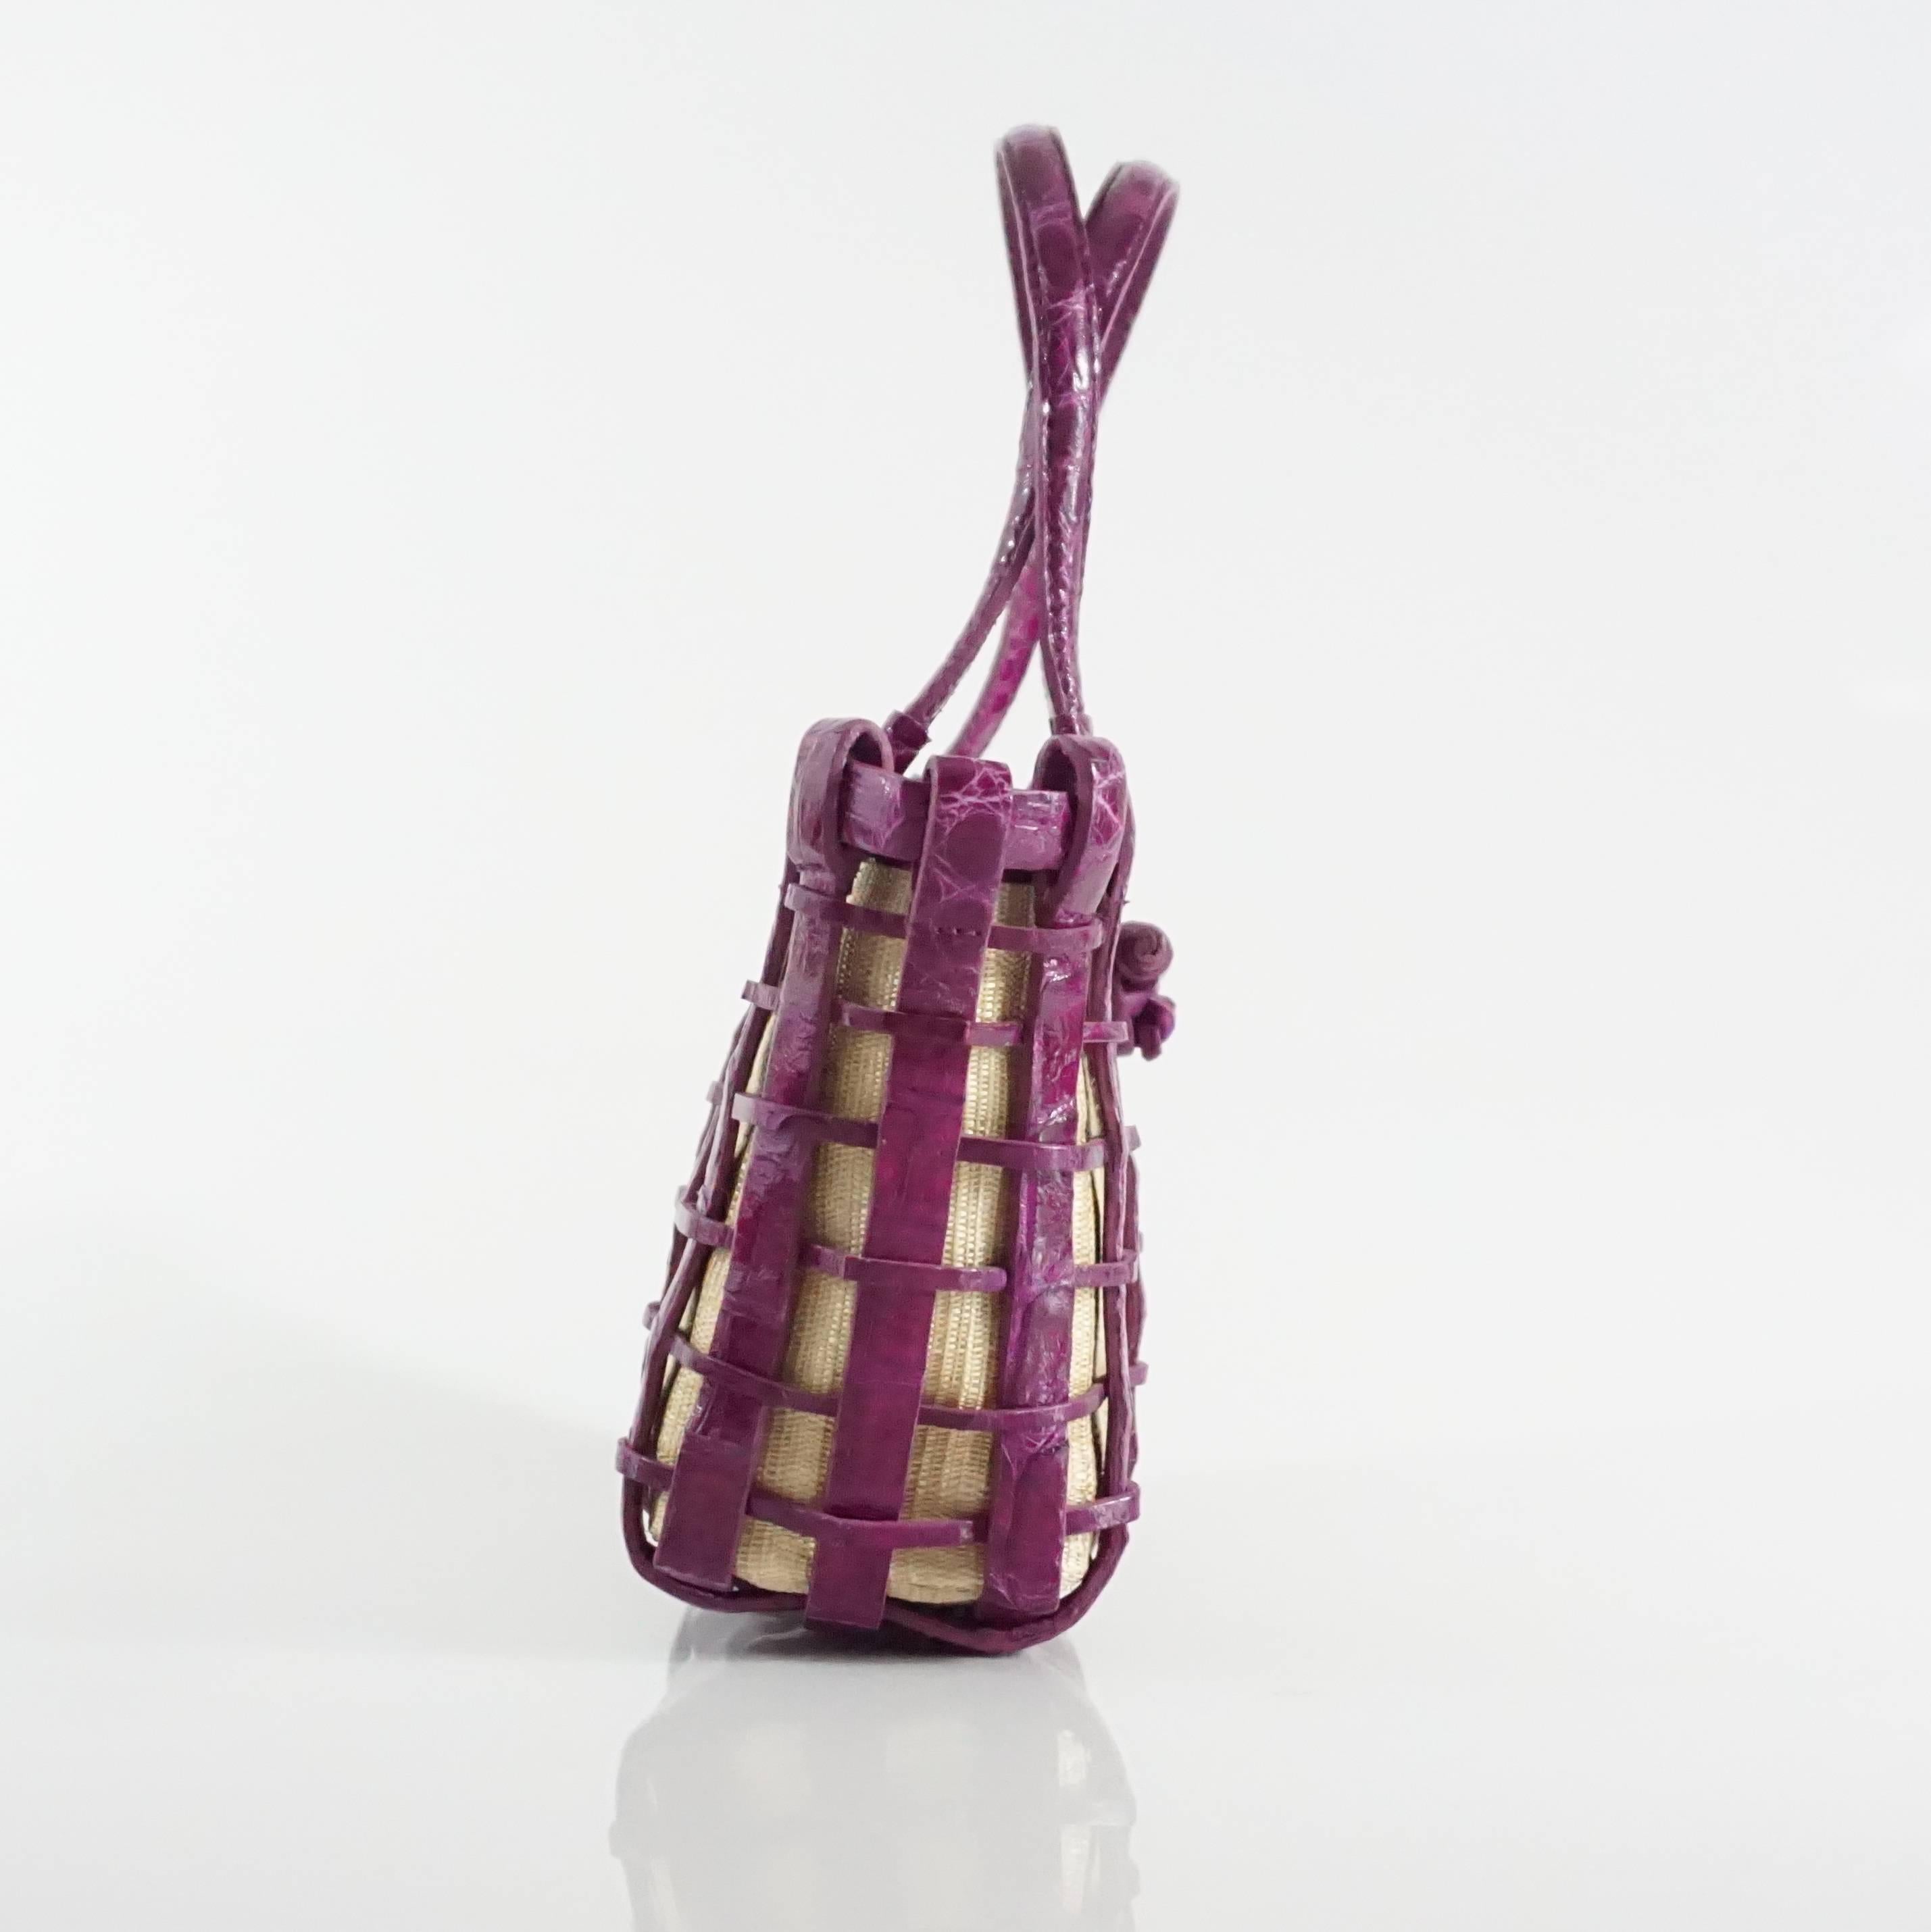 This Nancy Gonzalez fuchsia crocodile skin and canvas mini tote has two handles and a woven appearance. The inside is purple and has a zippered pocket. This mini tote is in excellent condition and comes with a duster.

Measurements
Height: 5